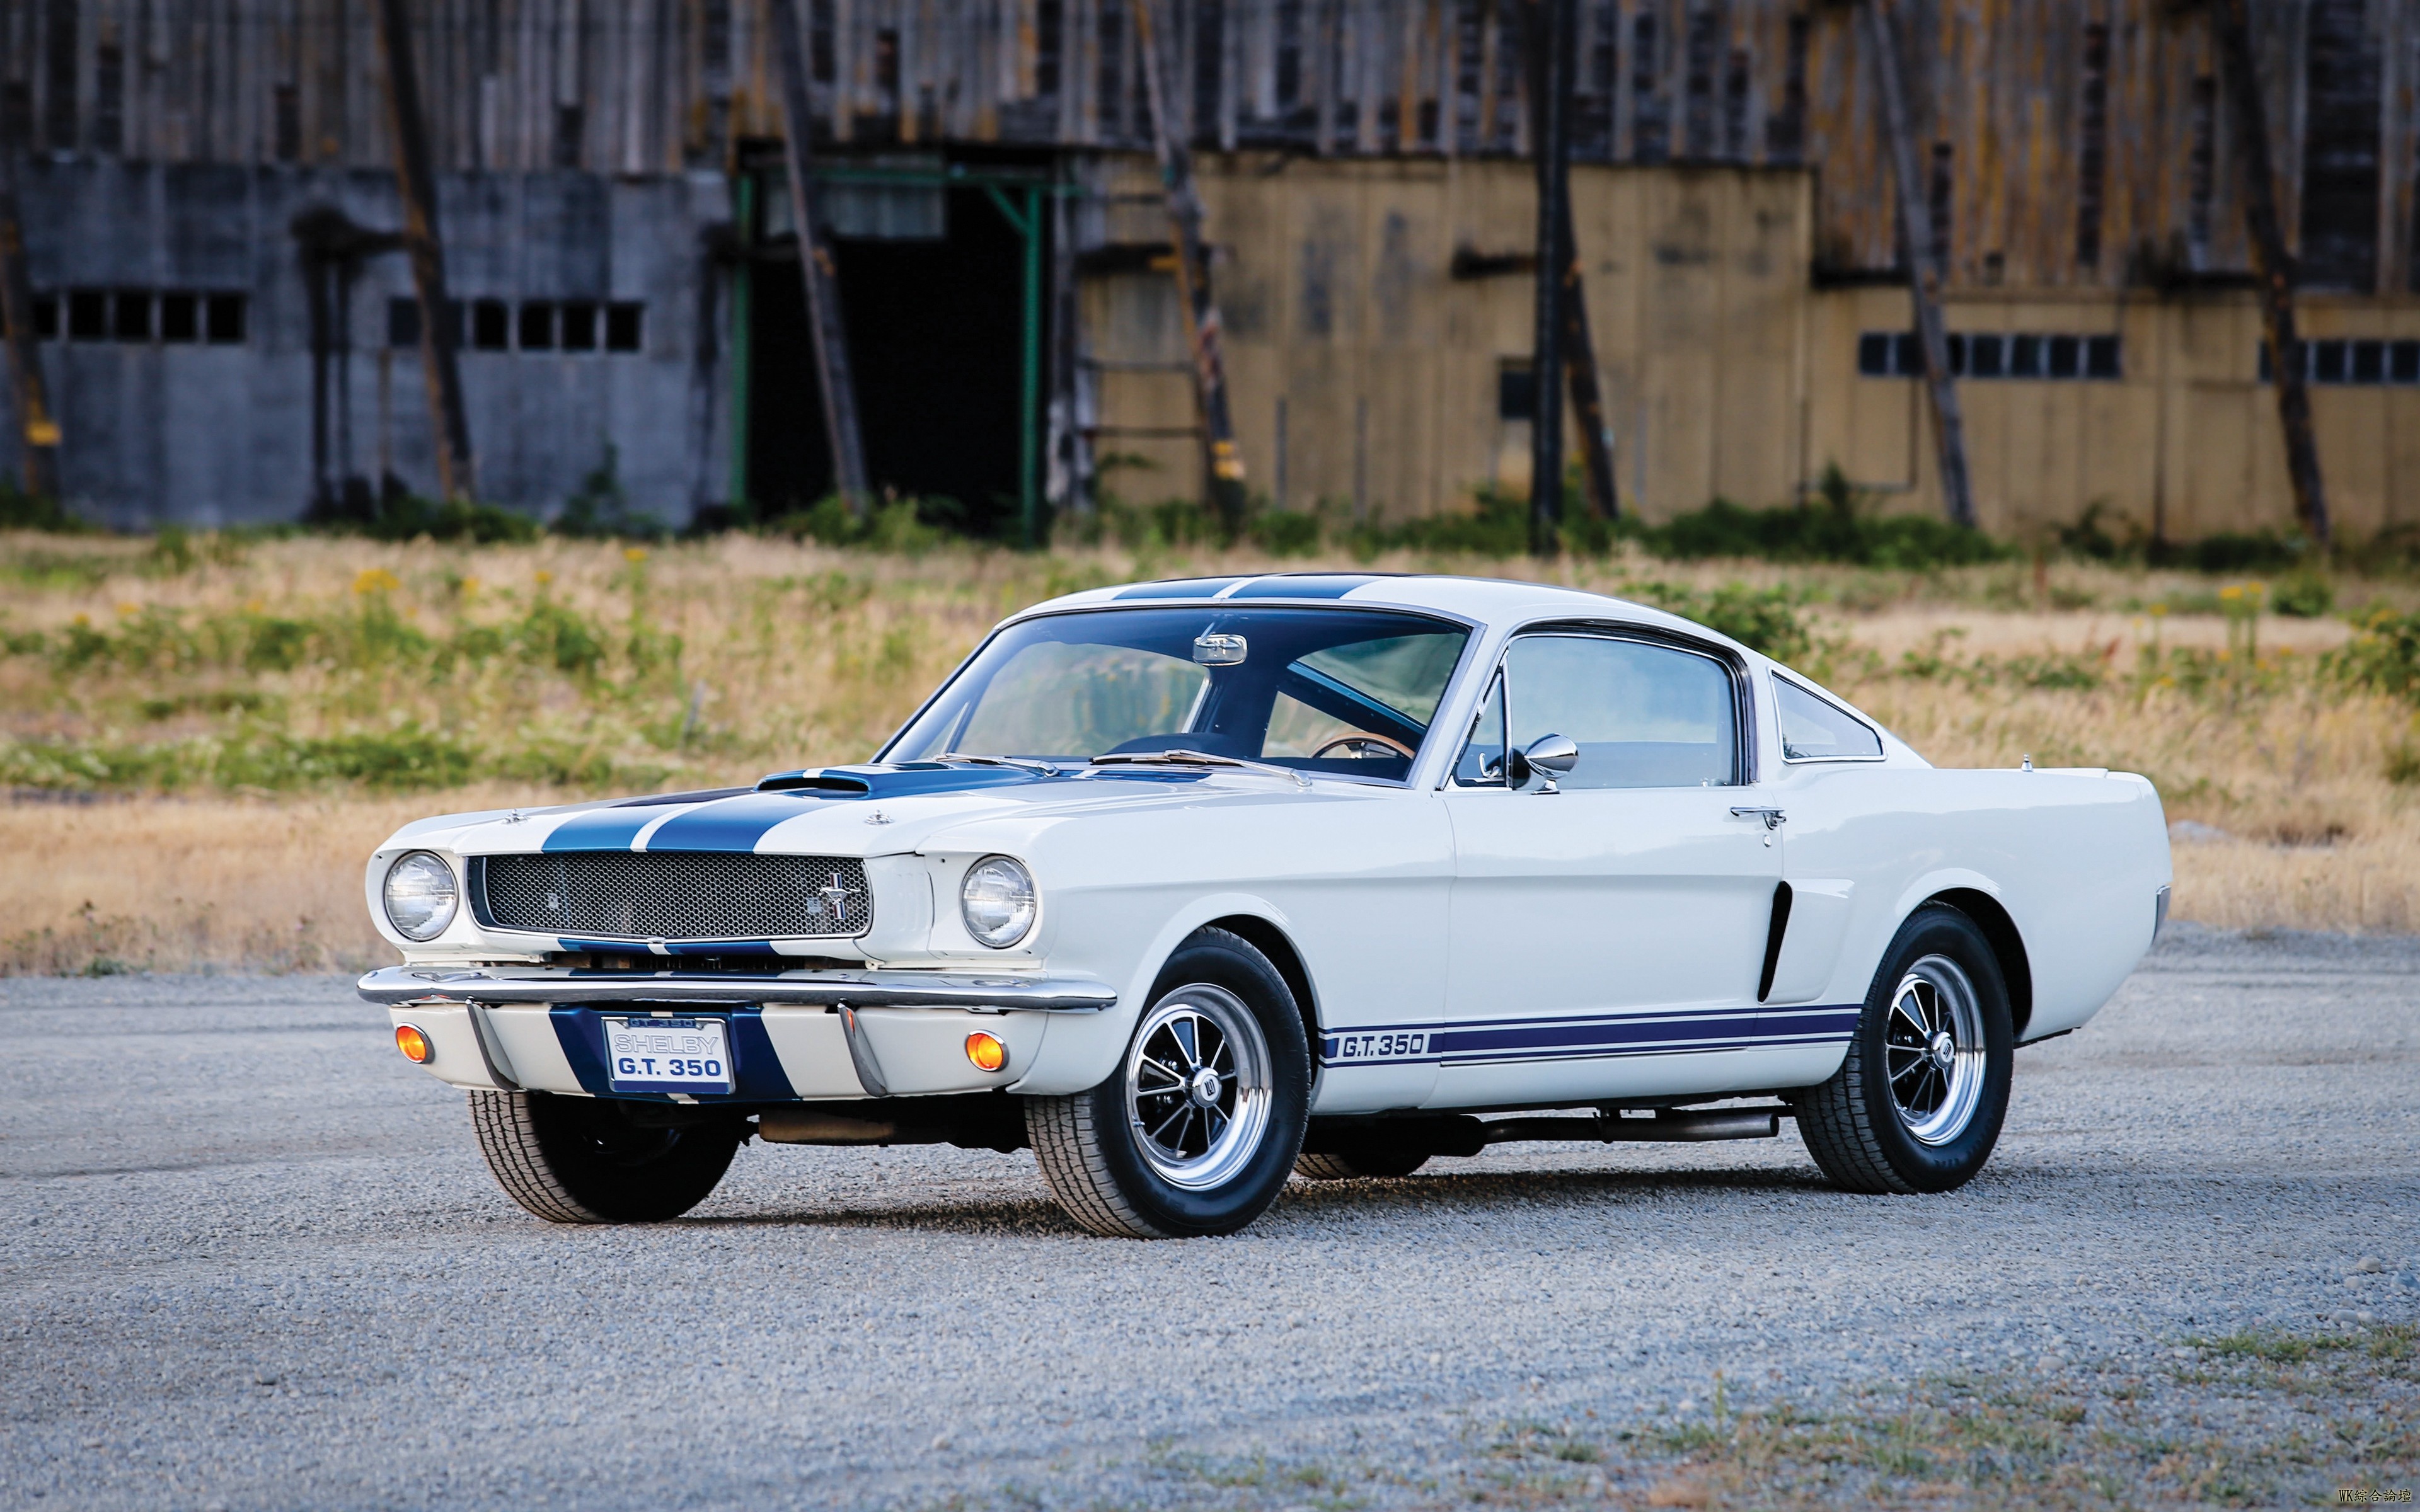 shelby_ford_mustang_gt350_side_view_105273_3840x2400.jpg